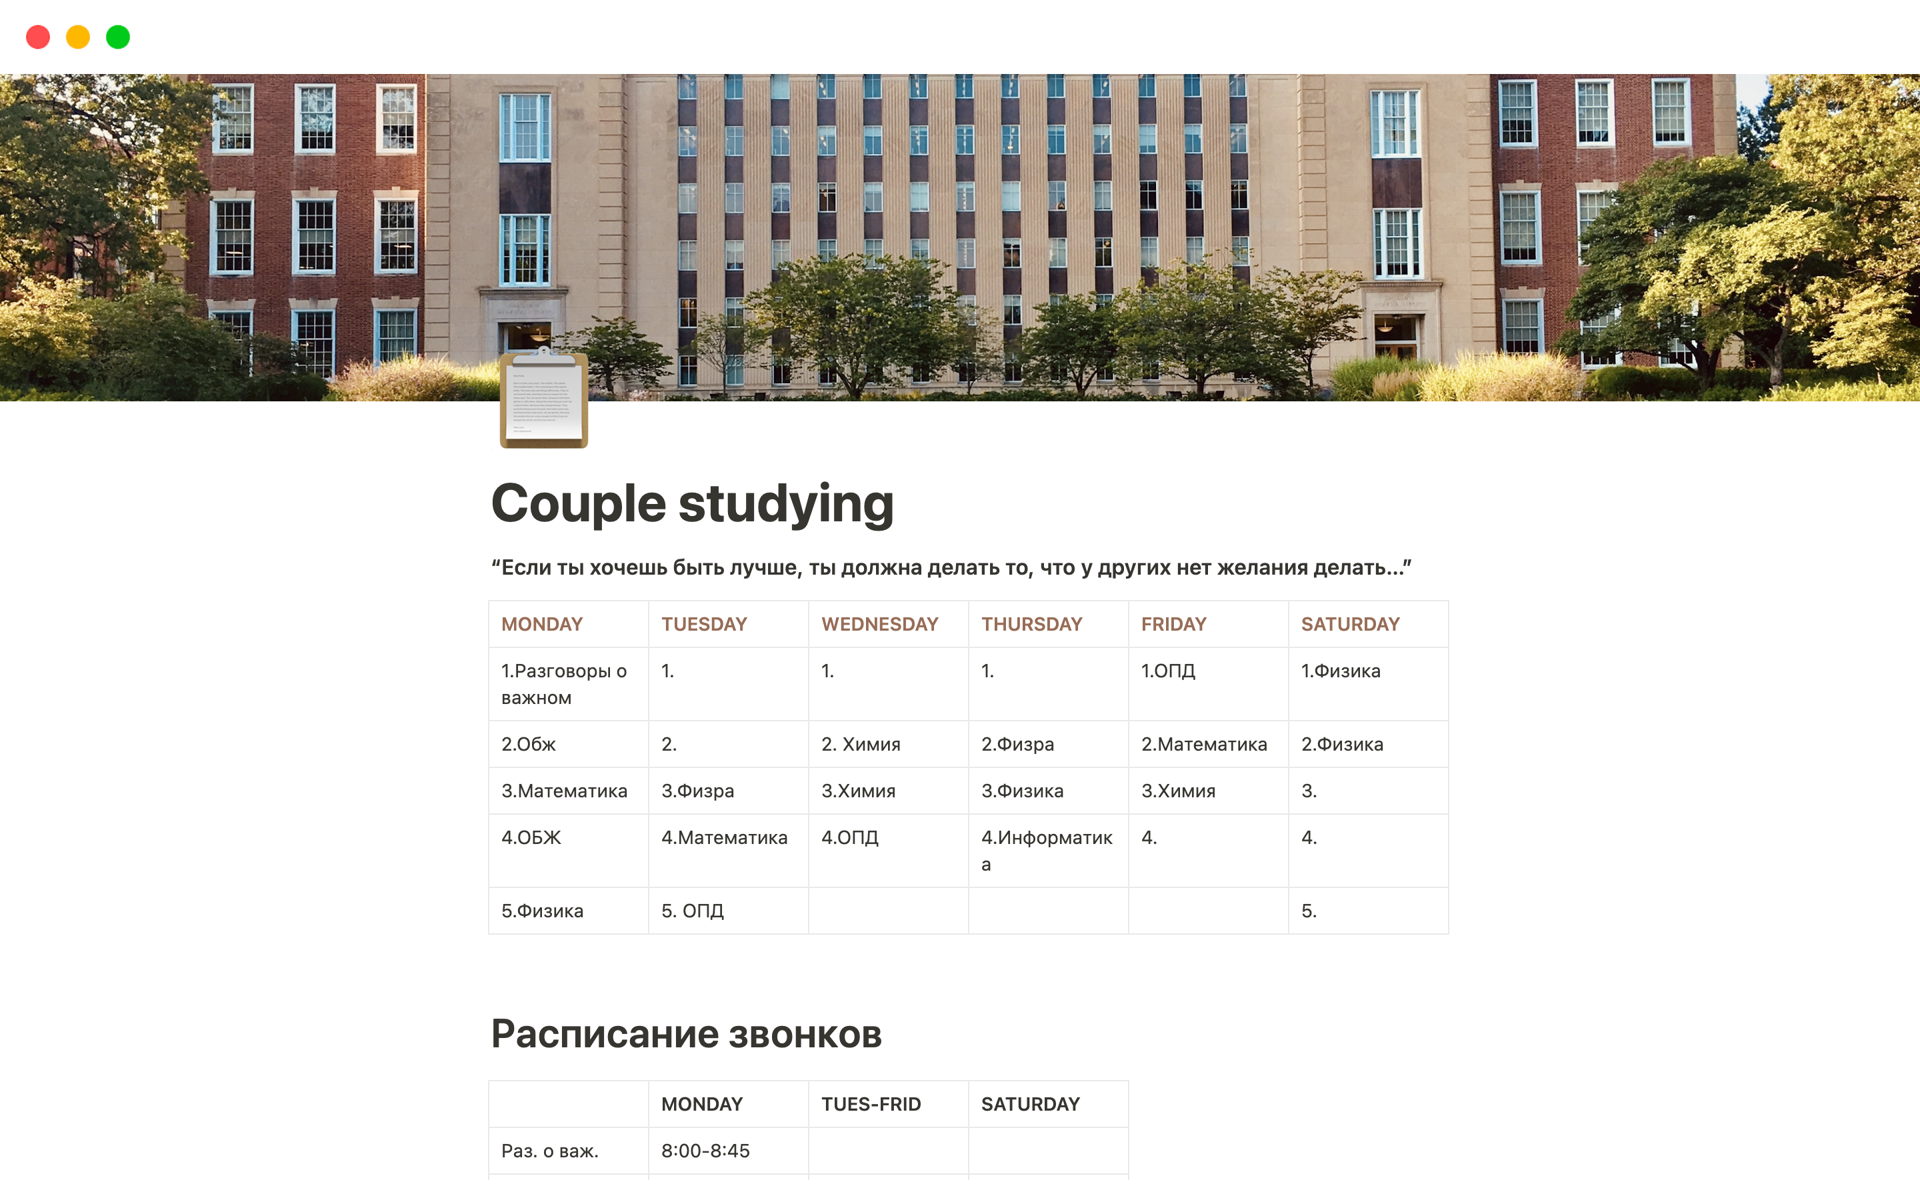 This template is suitable for students who need a convenient class schedule and call schedule